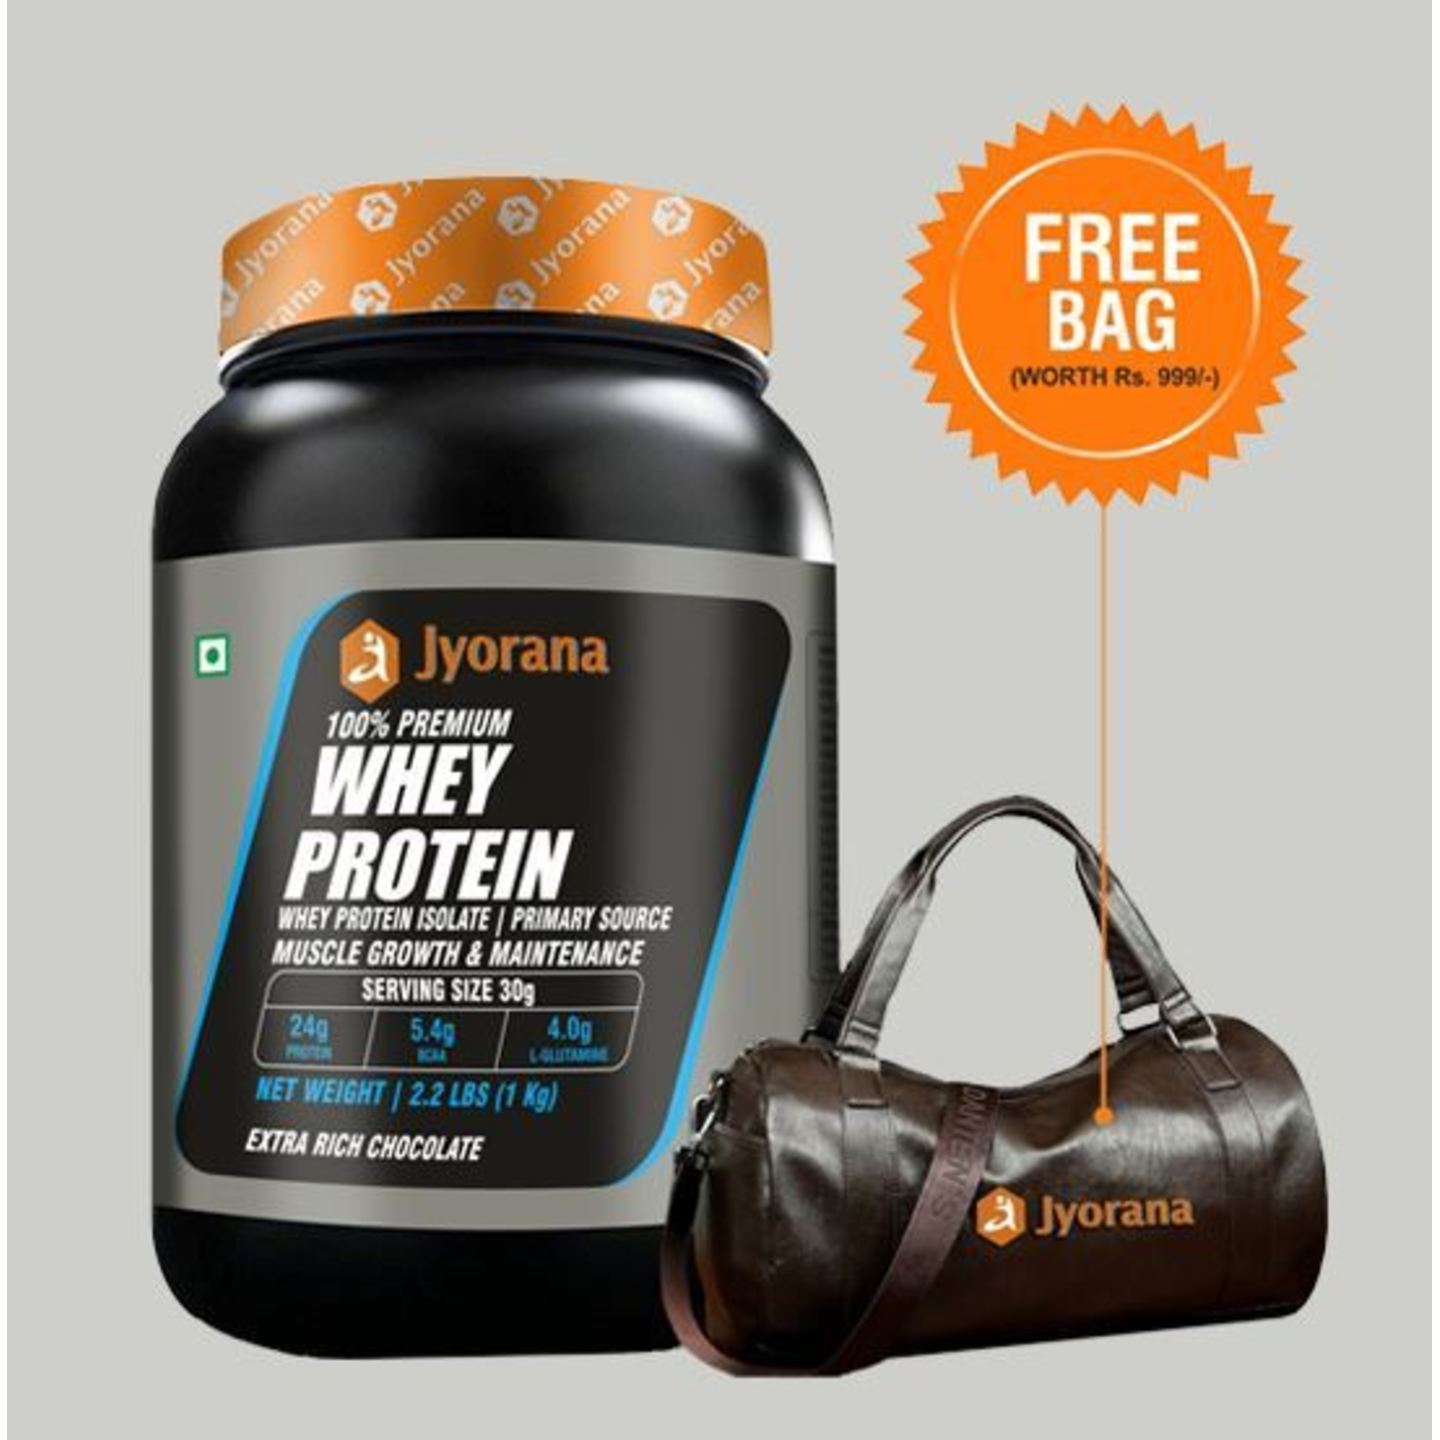 WellnessMart Jyorana 100 premium Whey protein with Isolate Extra Rich Chocolate Flavor with Free Sports Bag - 1 Kg